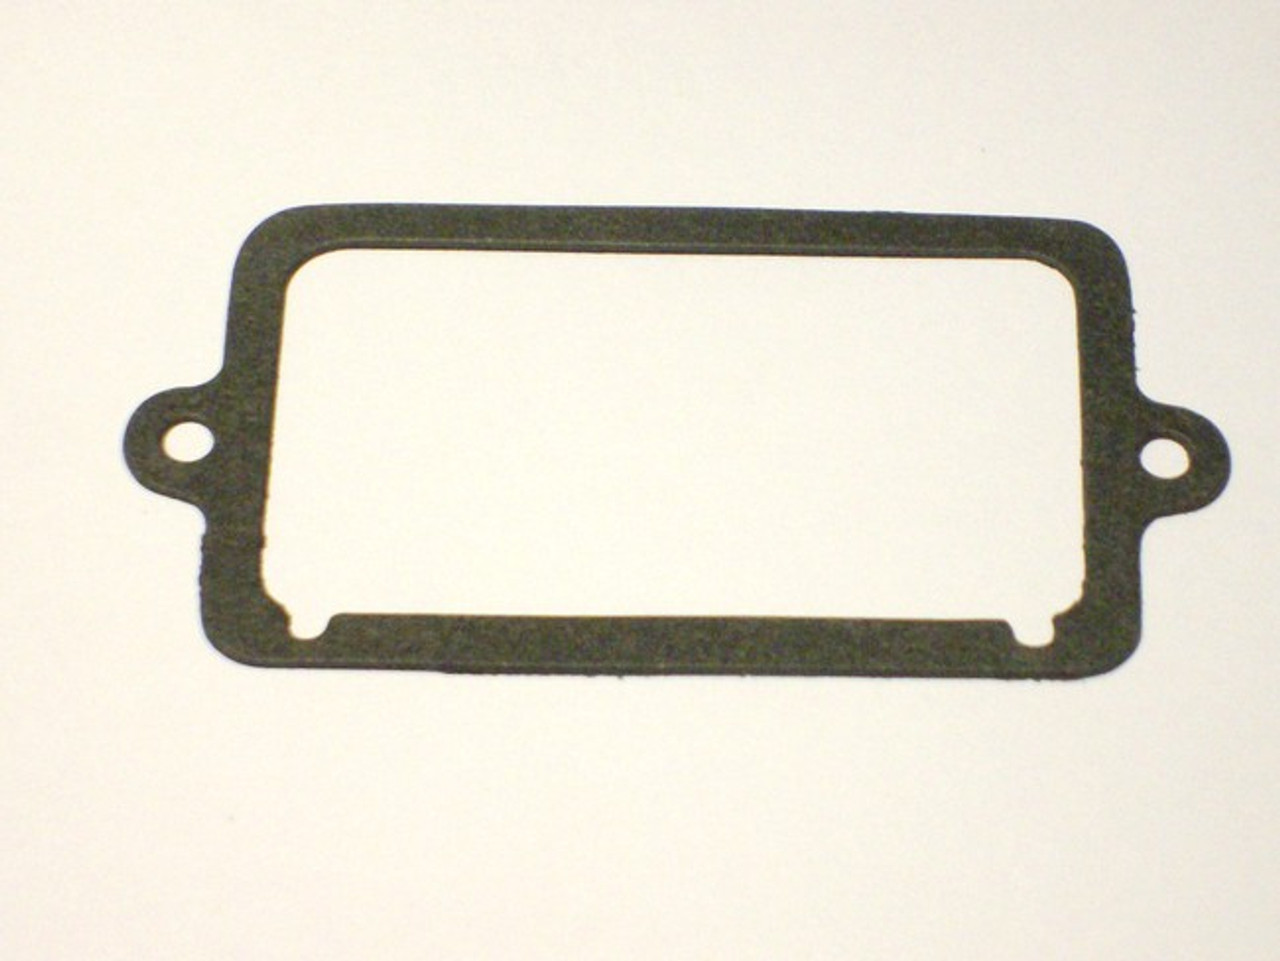 Valve Cover Gasket for Briggs and Stratton 27803, 27803S 